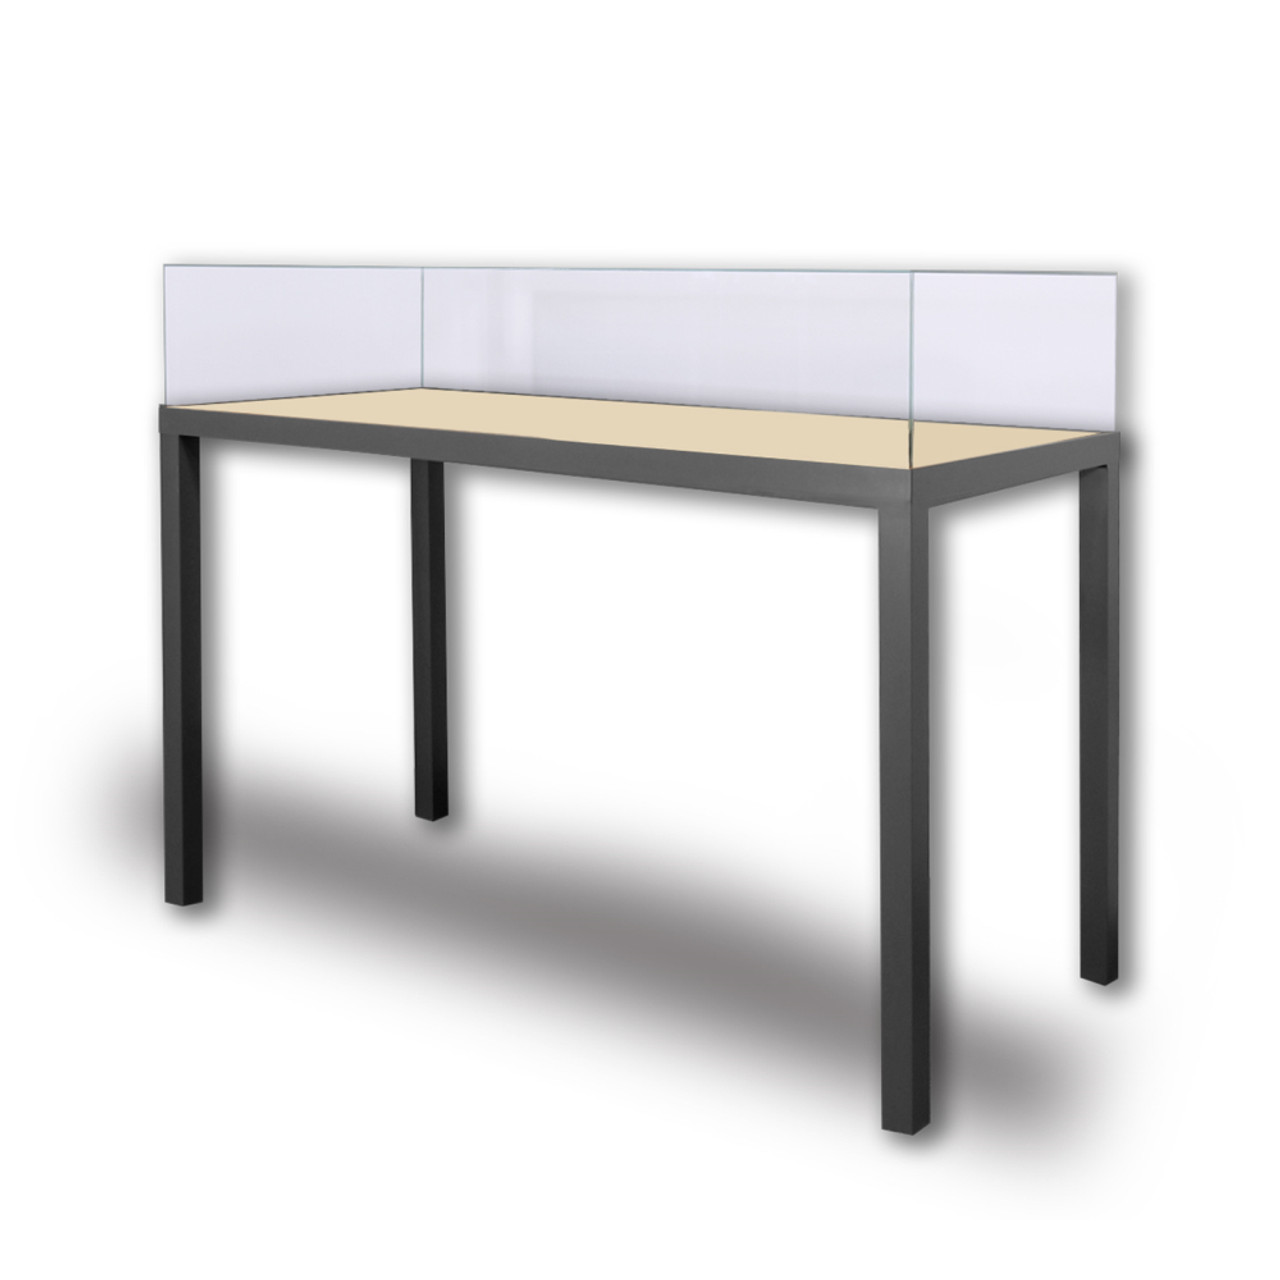 Painted Panel Leg Table Case with Lift-Off Vitrine